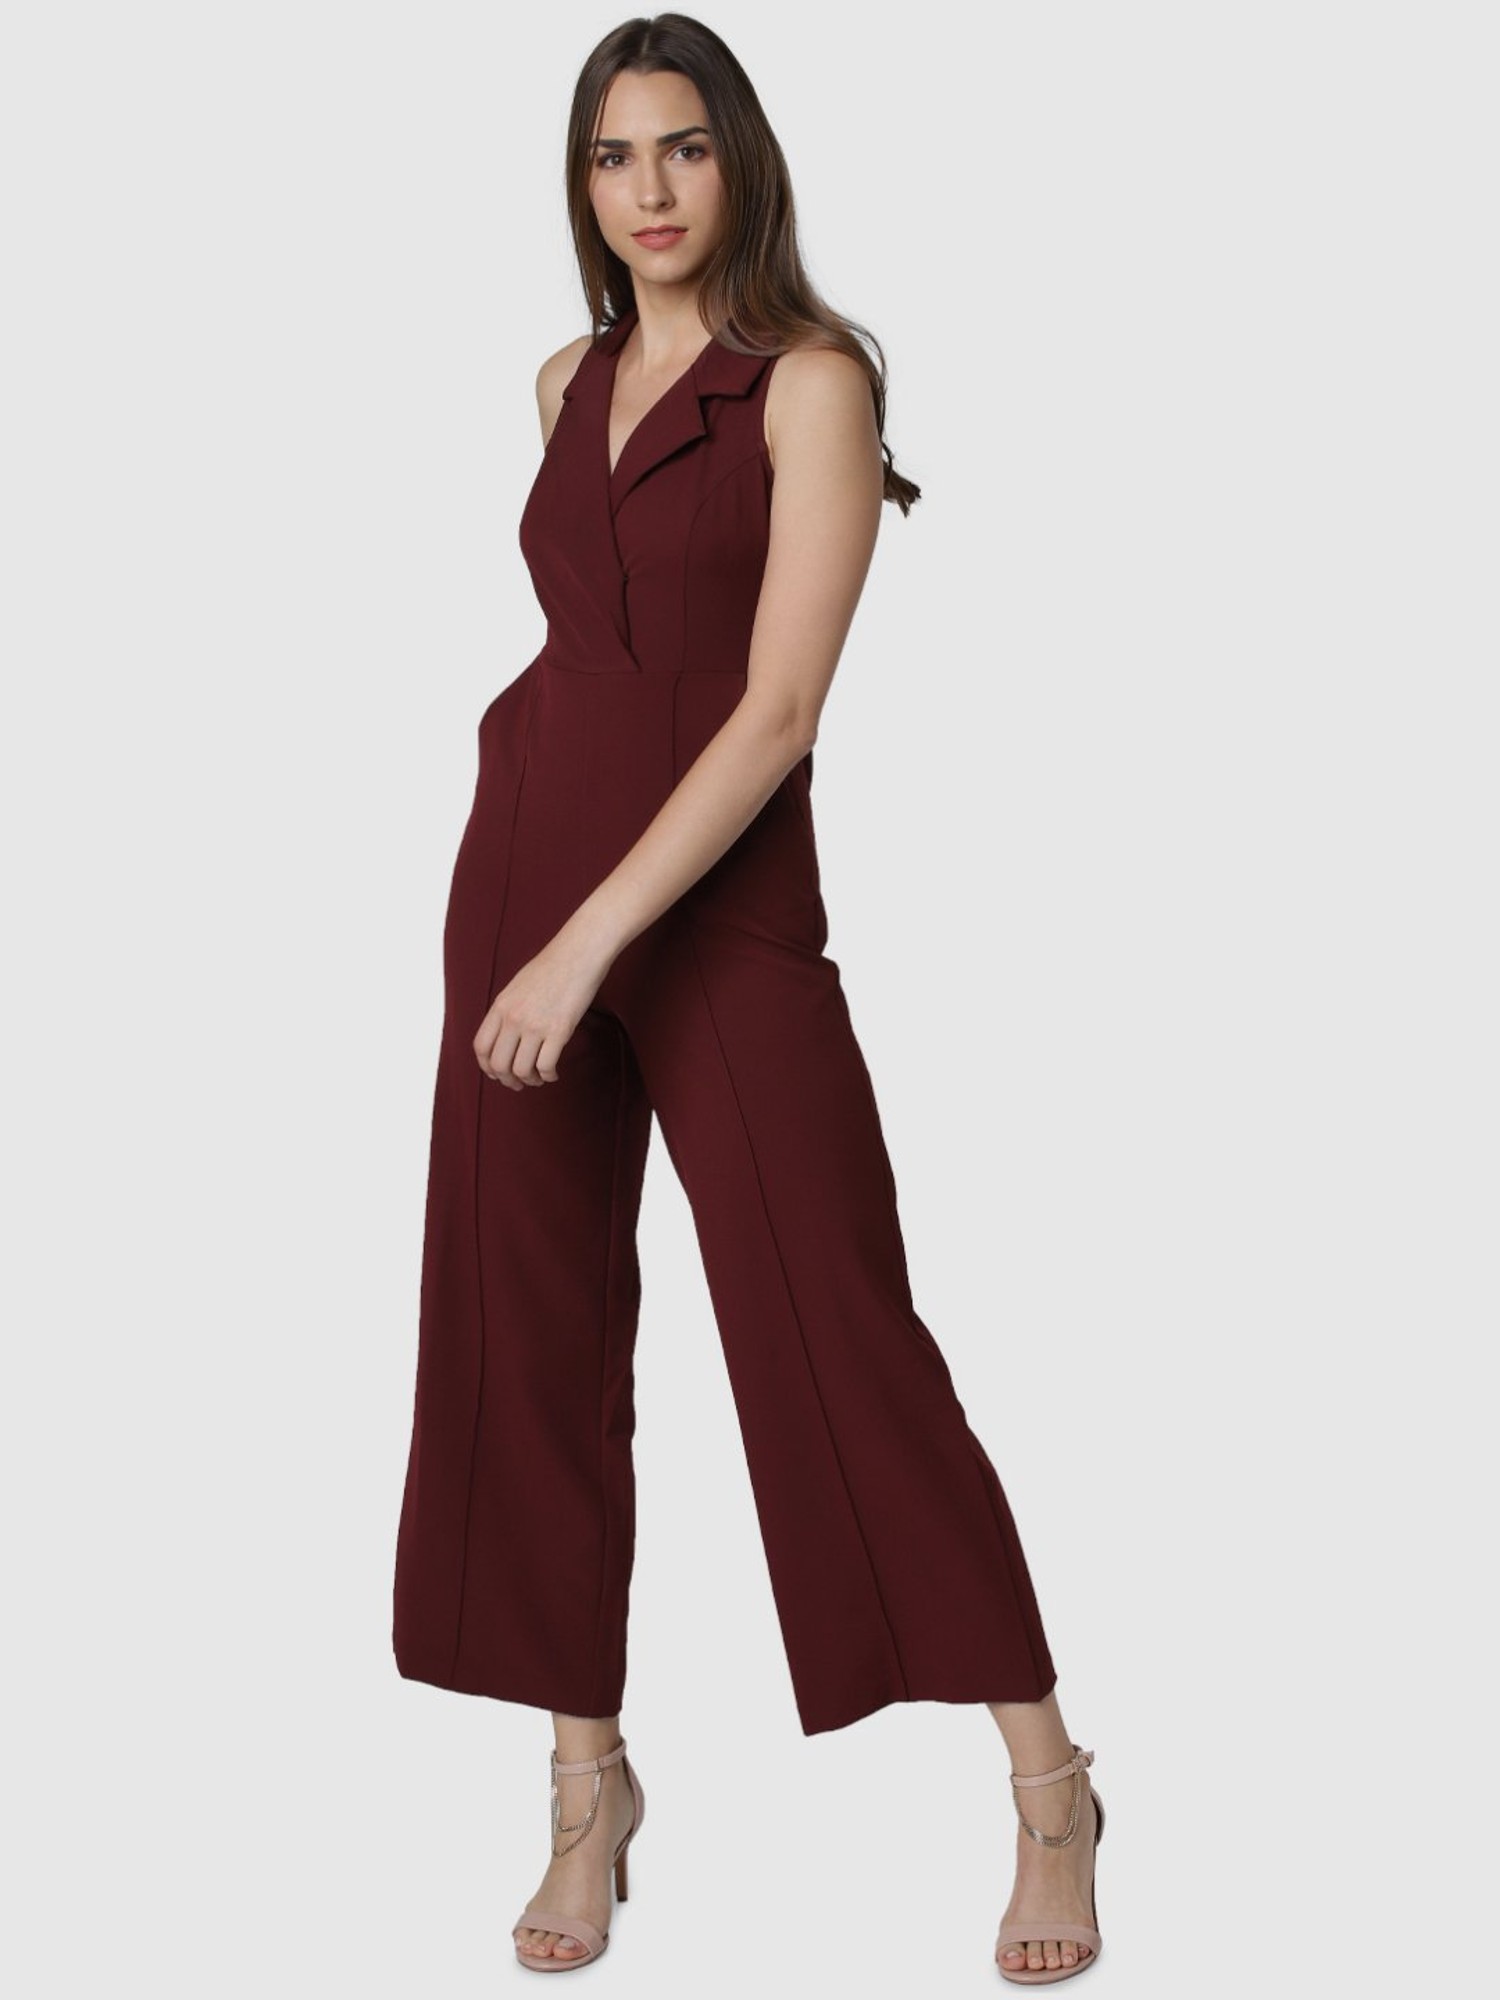 Plus Size Brown Jumpsuits  Everyday Low Prices  Rainbow